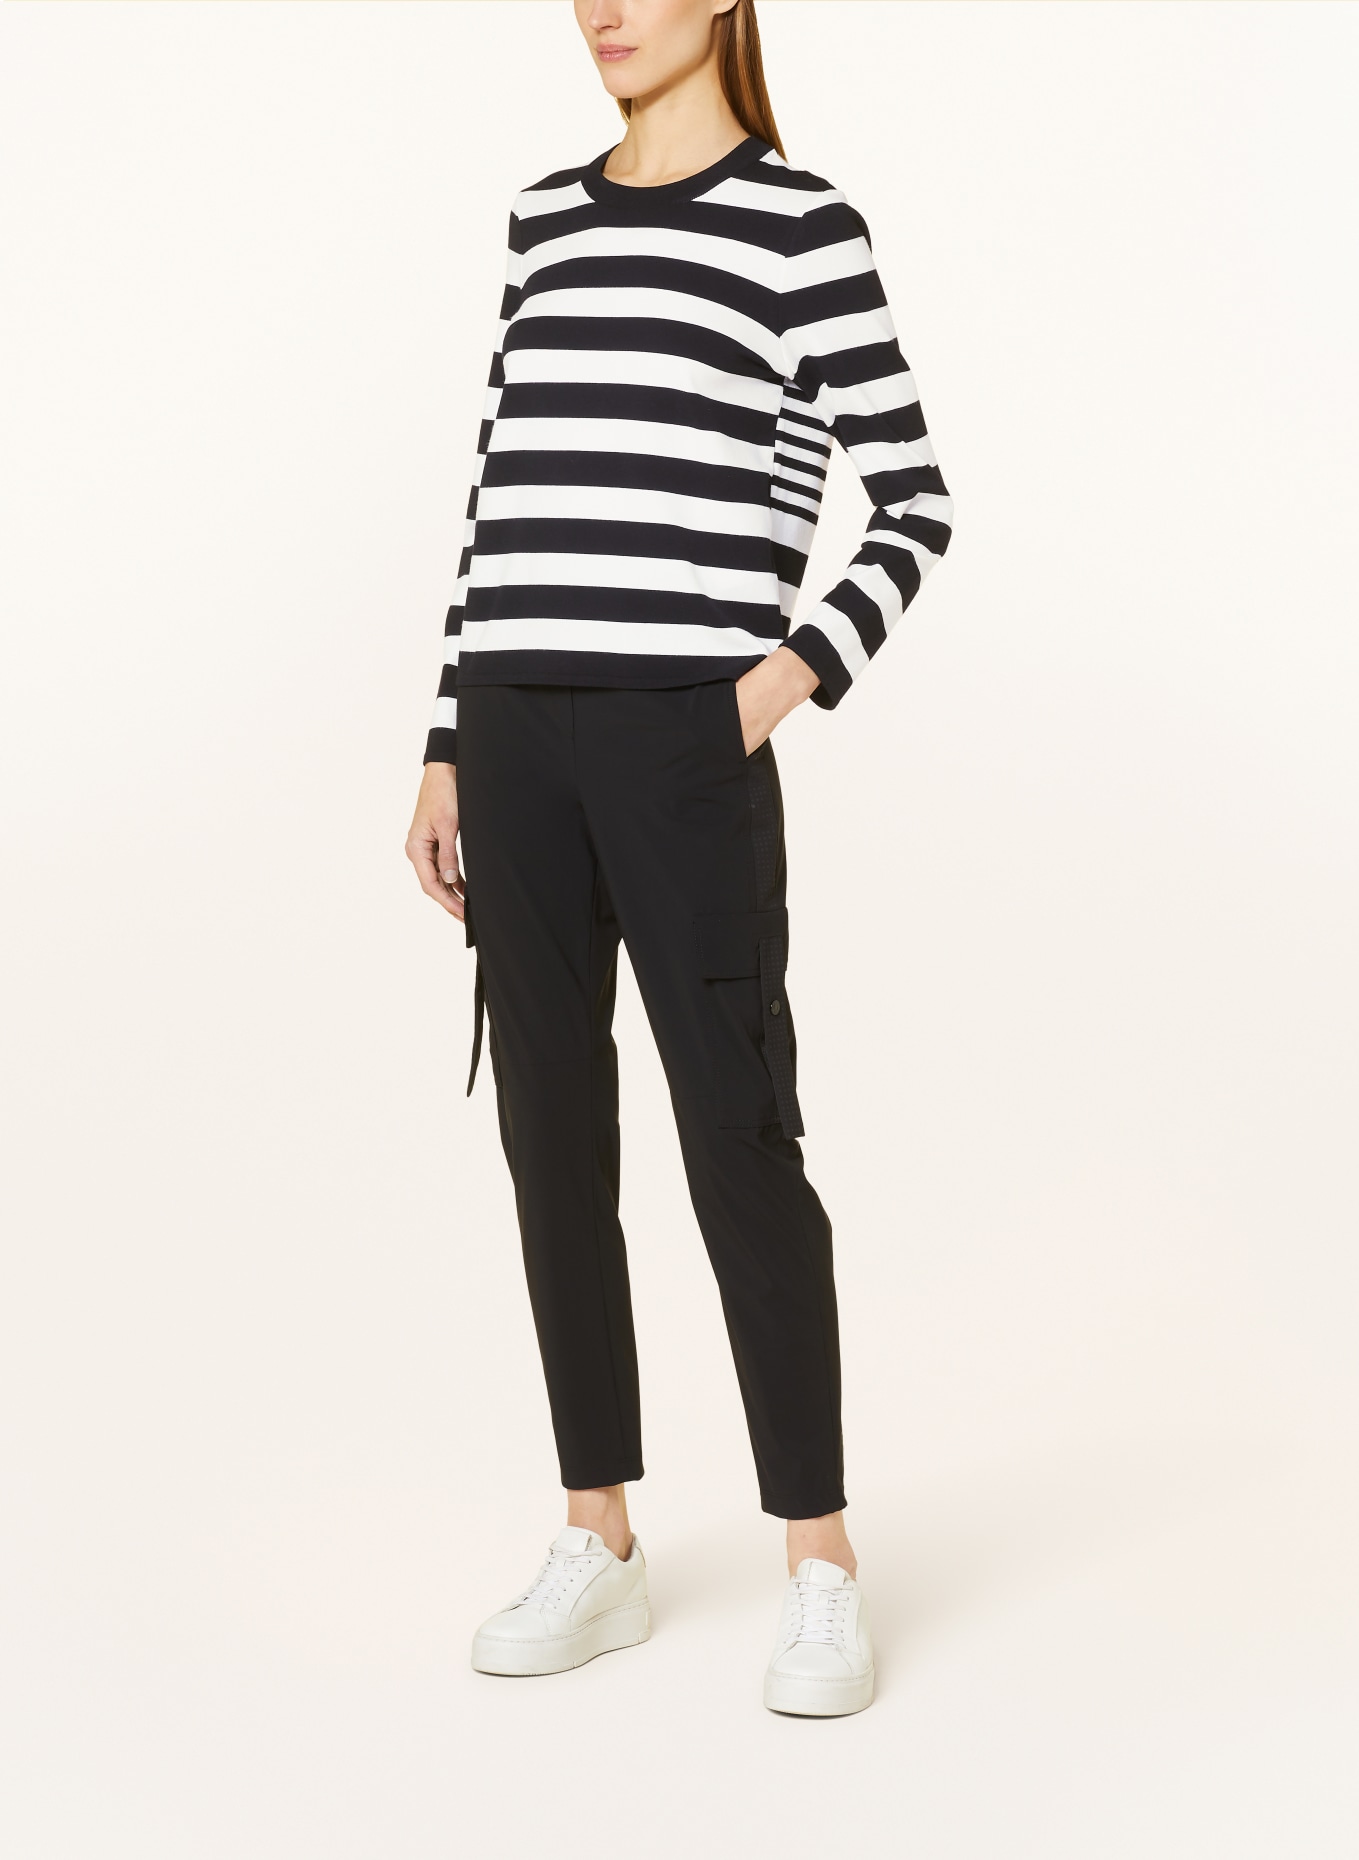 MARC CAIN Sweater, Color: 190 white and black (Image 2)